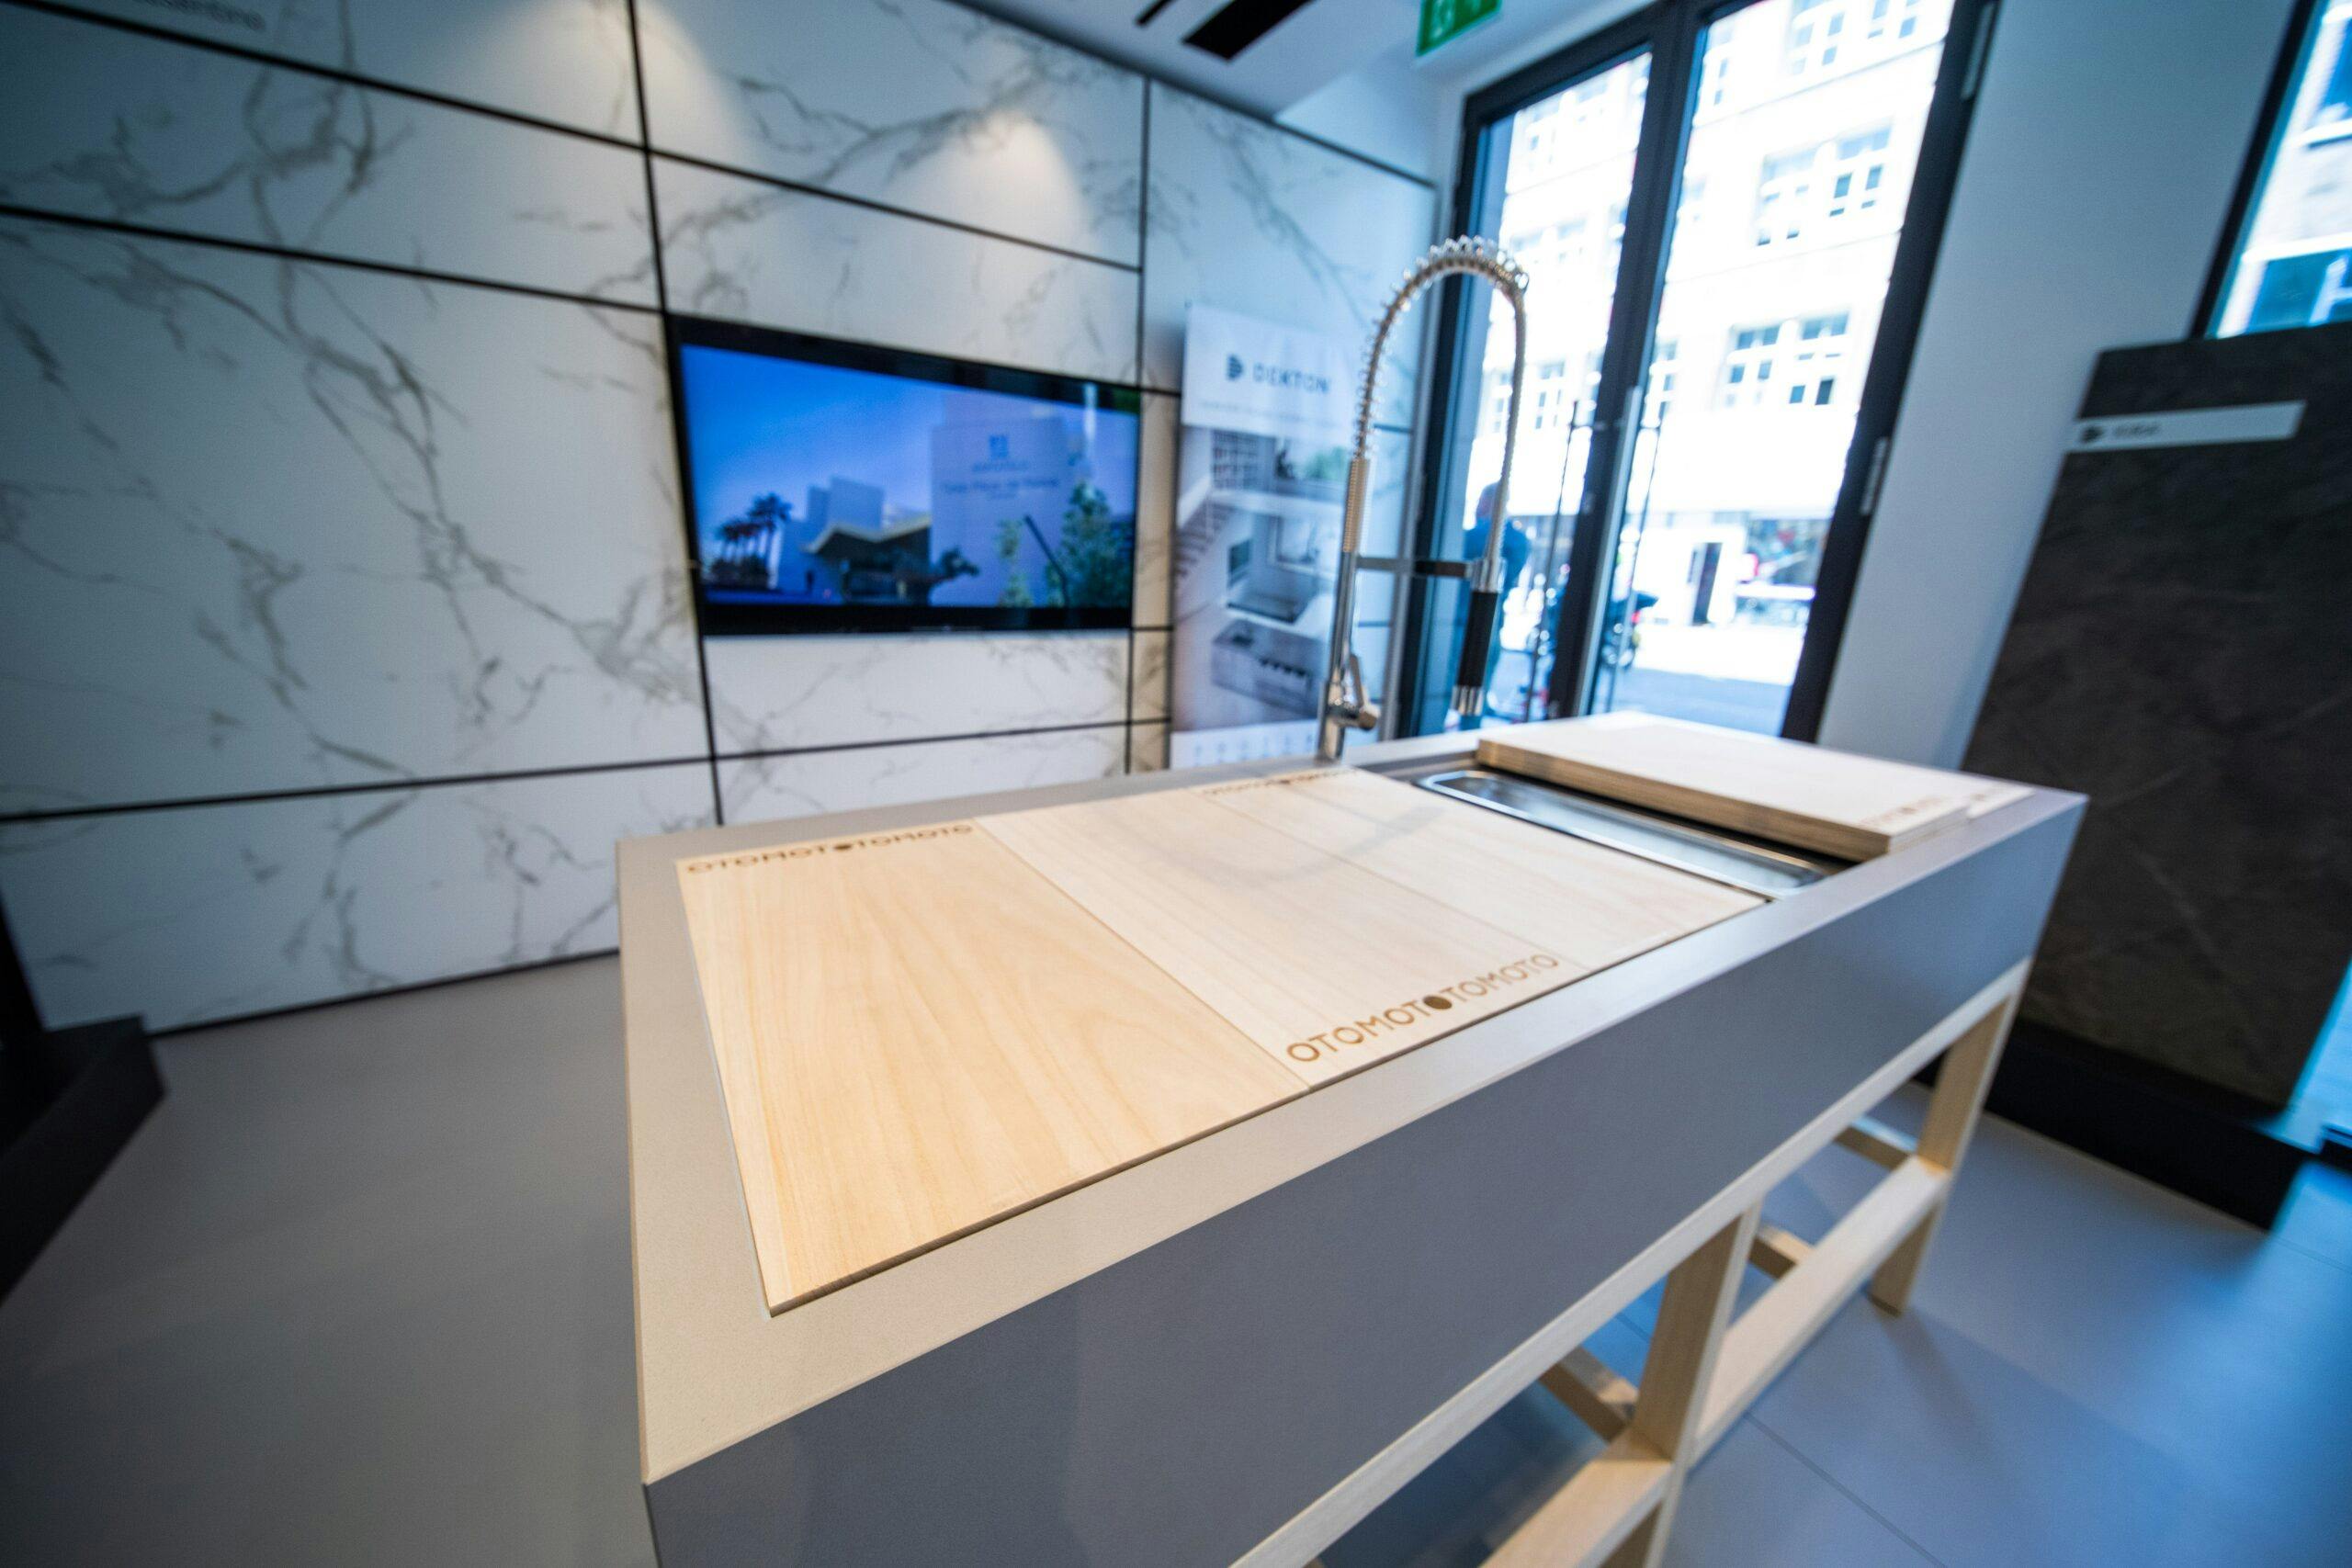 Image 33 of CE6I8312 1 scaled in The OTOMOTO Kitchen Sink at Clerkenwell Design Week in London - Cosentino